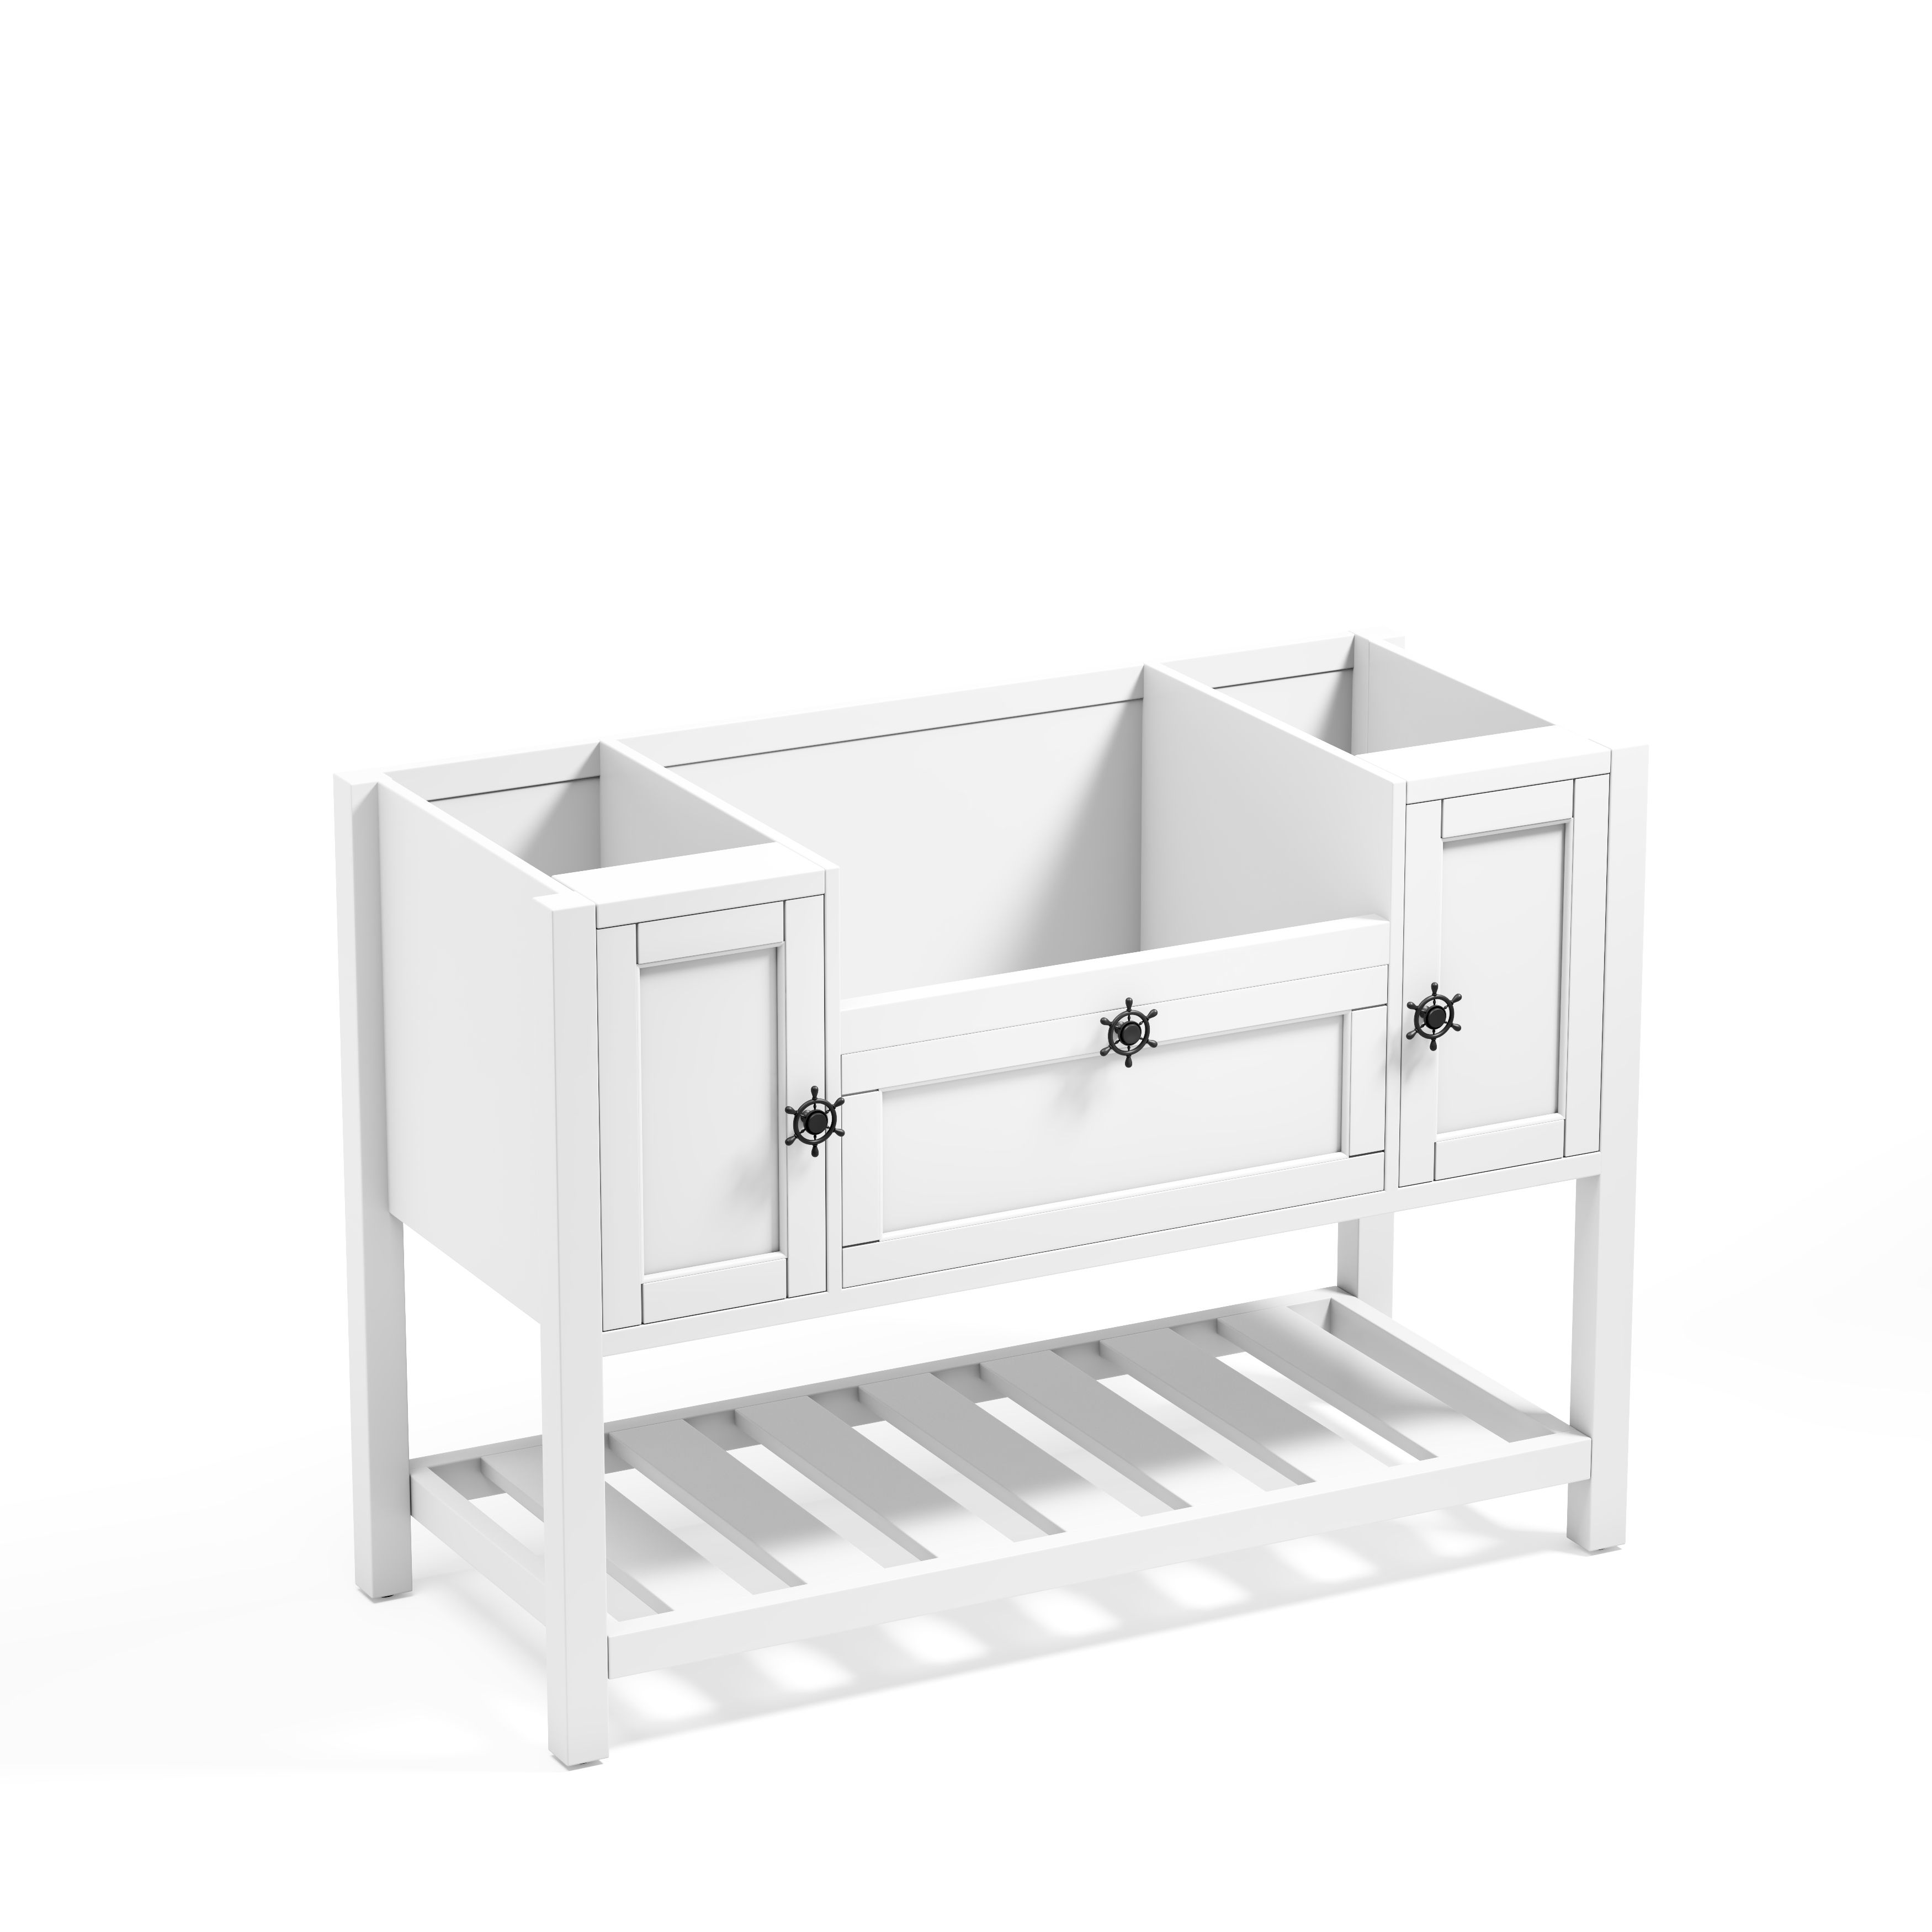 Solid Wood Bathroom Vanities Without Tops 48 in. W x 20 in. D x 33.60 in. H   Bath Vanity in White with-CASAINC